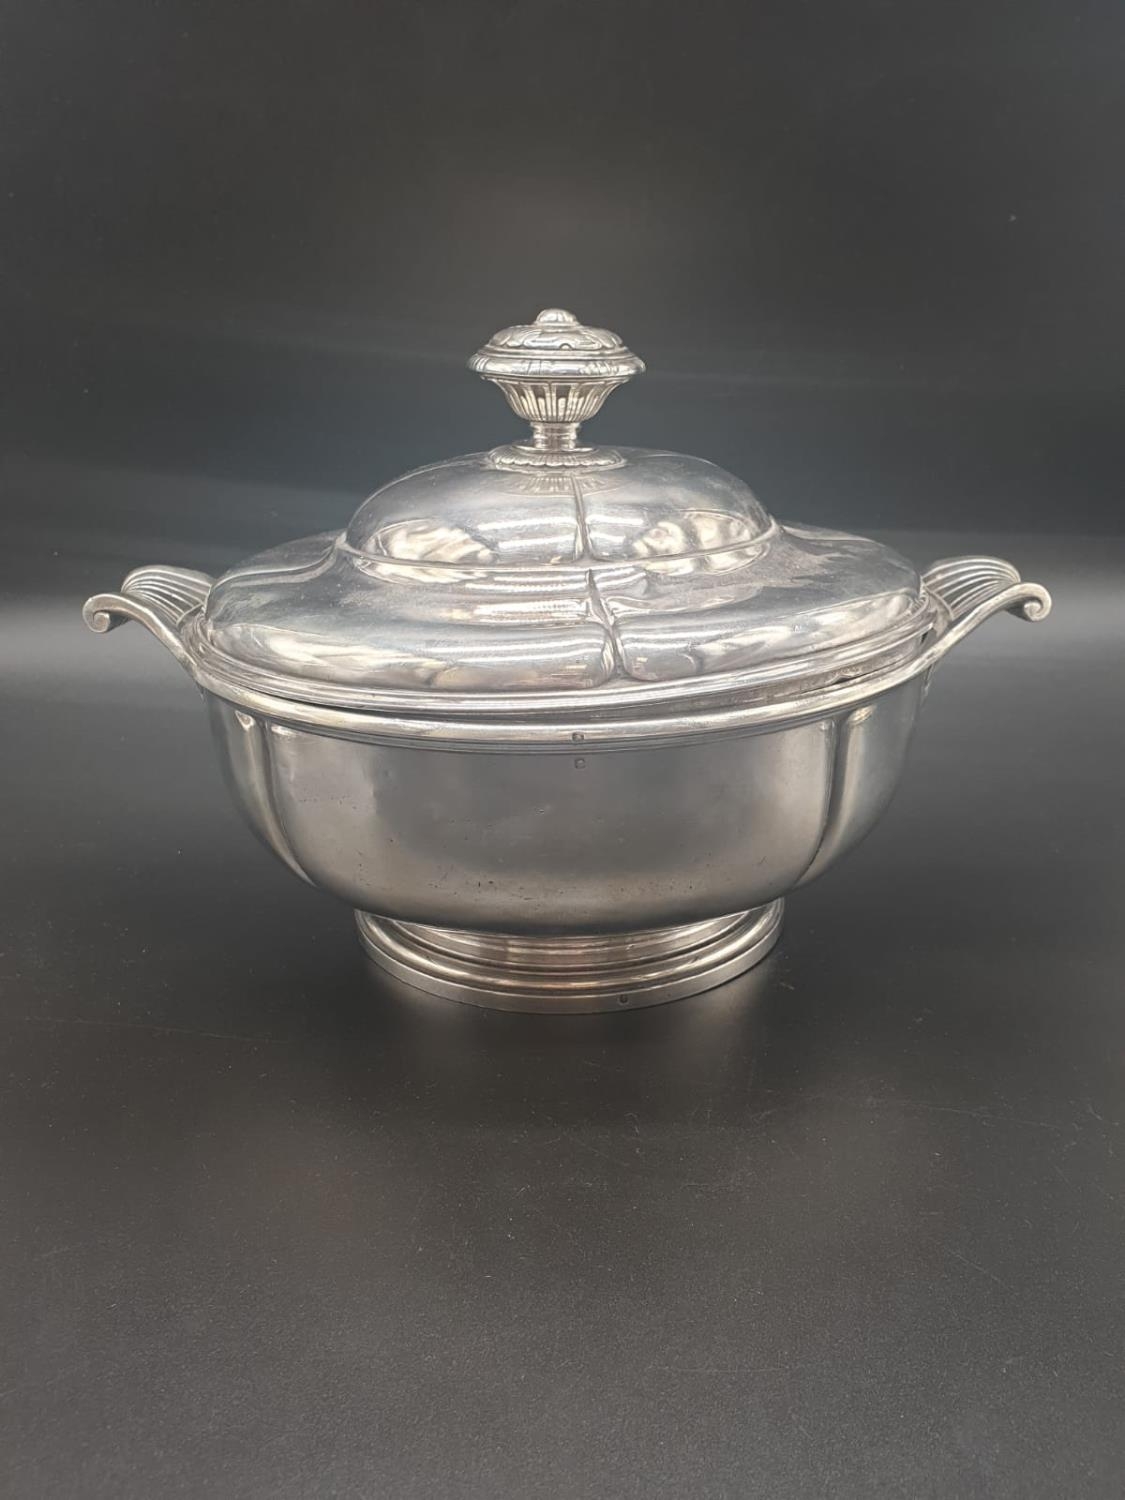 A SOLID SILVER (950 SILVER) FRENCH ENTREE TURINE MADE BY JULES RAYD IN THE 19th CENTURY. 1133gms - Image 4 of 14